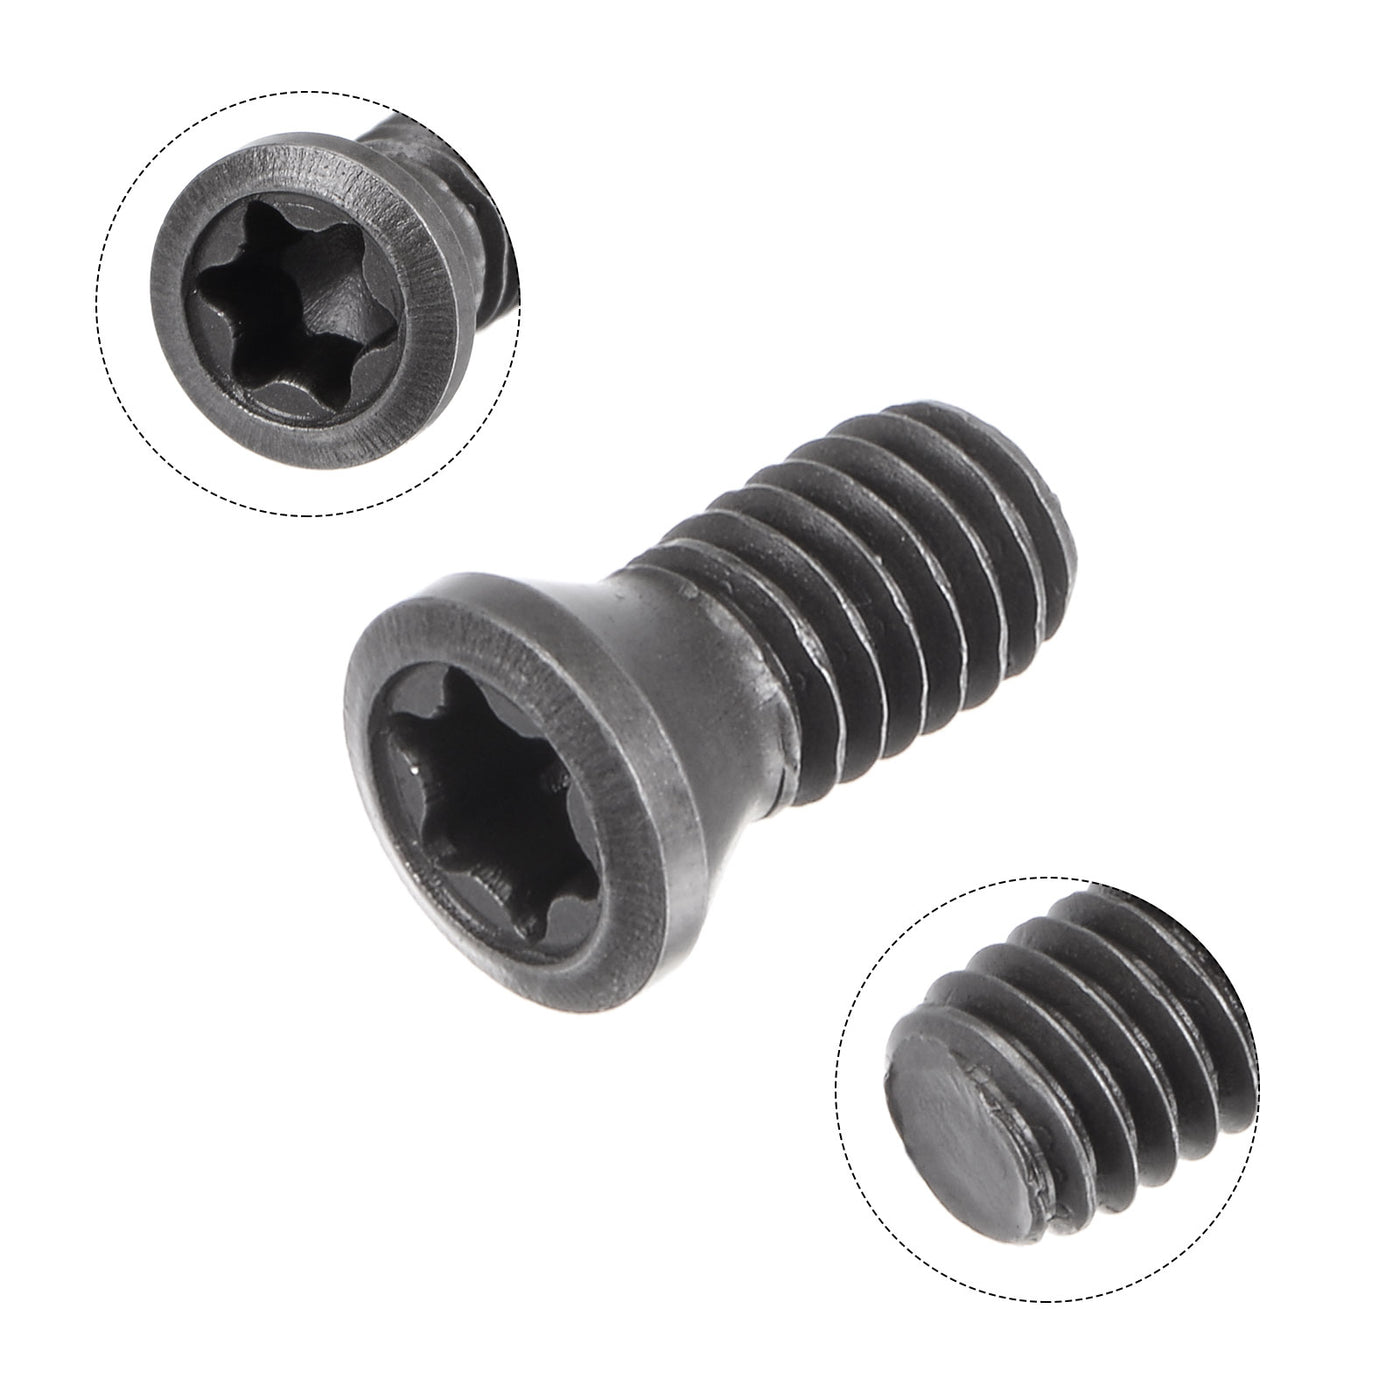 uxcell Uxcell M4x9-D5.7 Torx Set Screws for CNC Lathe Turning Tool Holder, 5Pcs